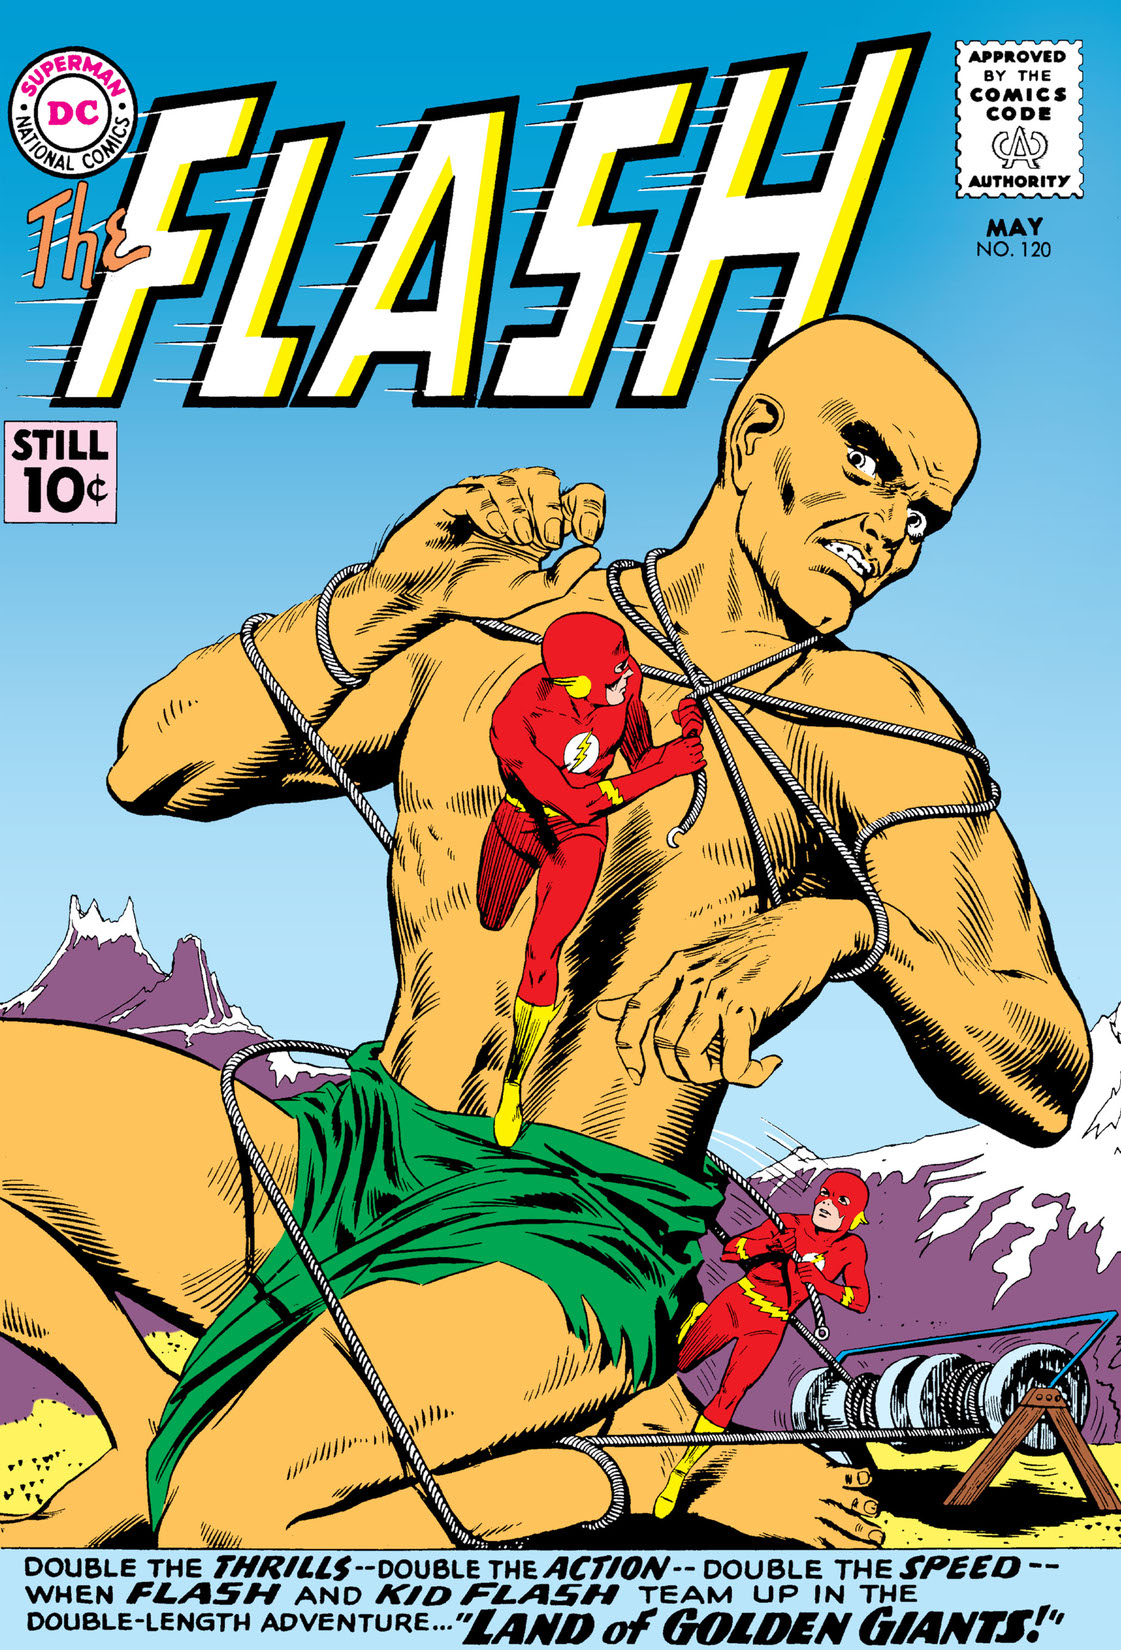 The Flash (1959-) #120 preview images